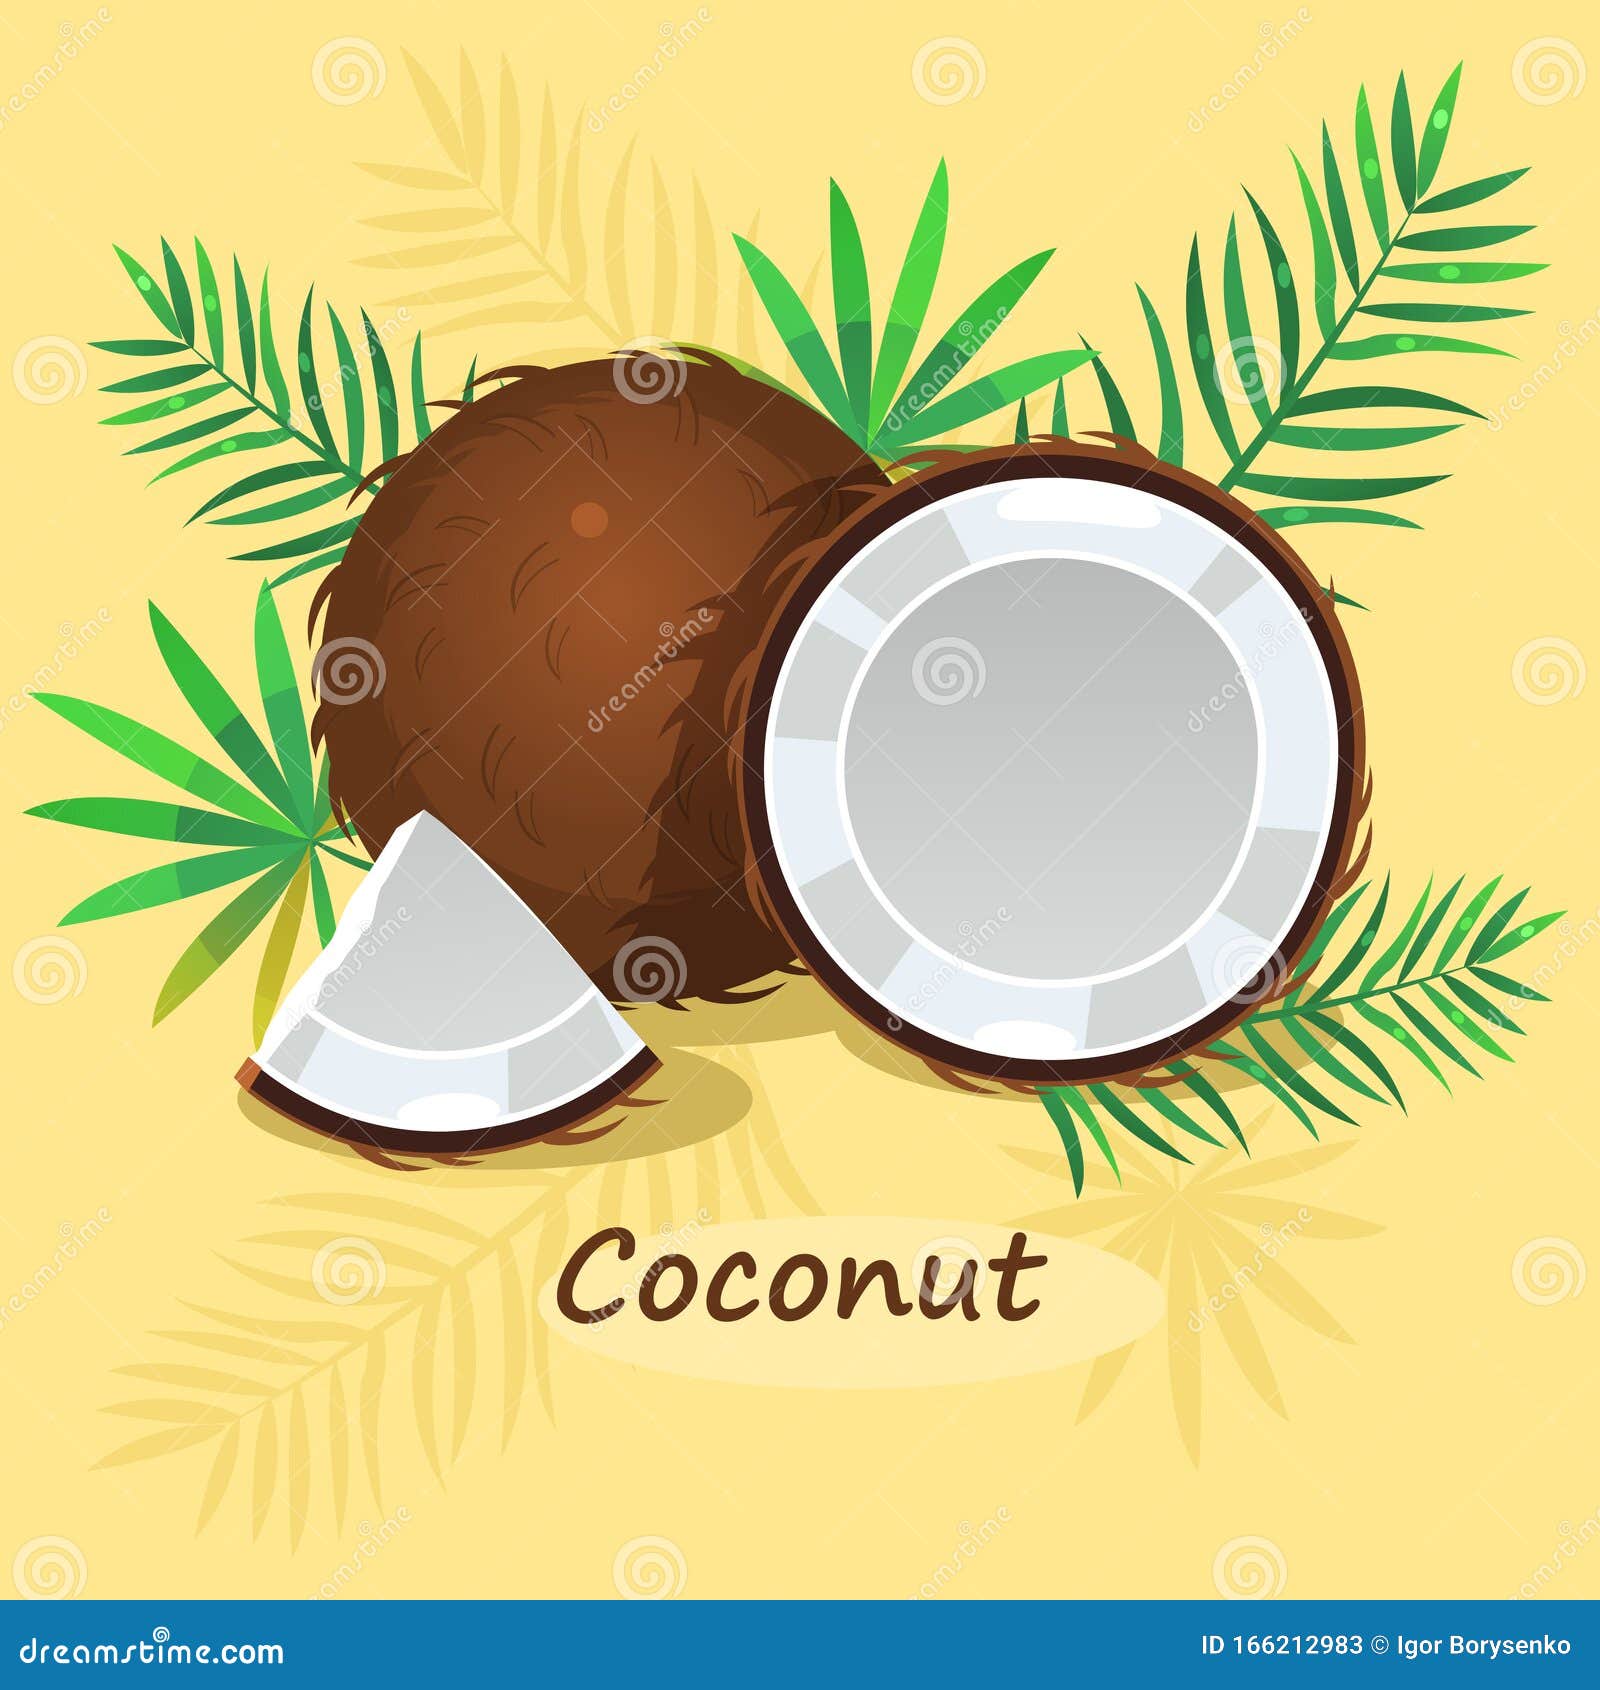 Coconut with Green Leafs on Yellow Background Stock Vector ...